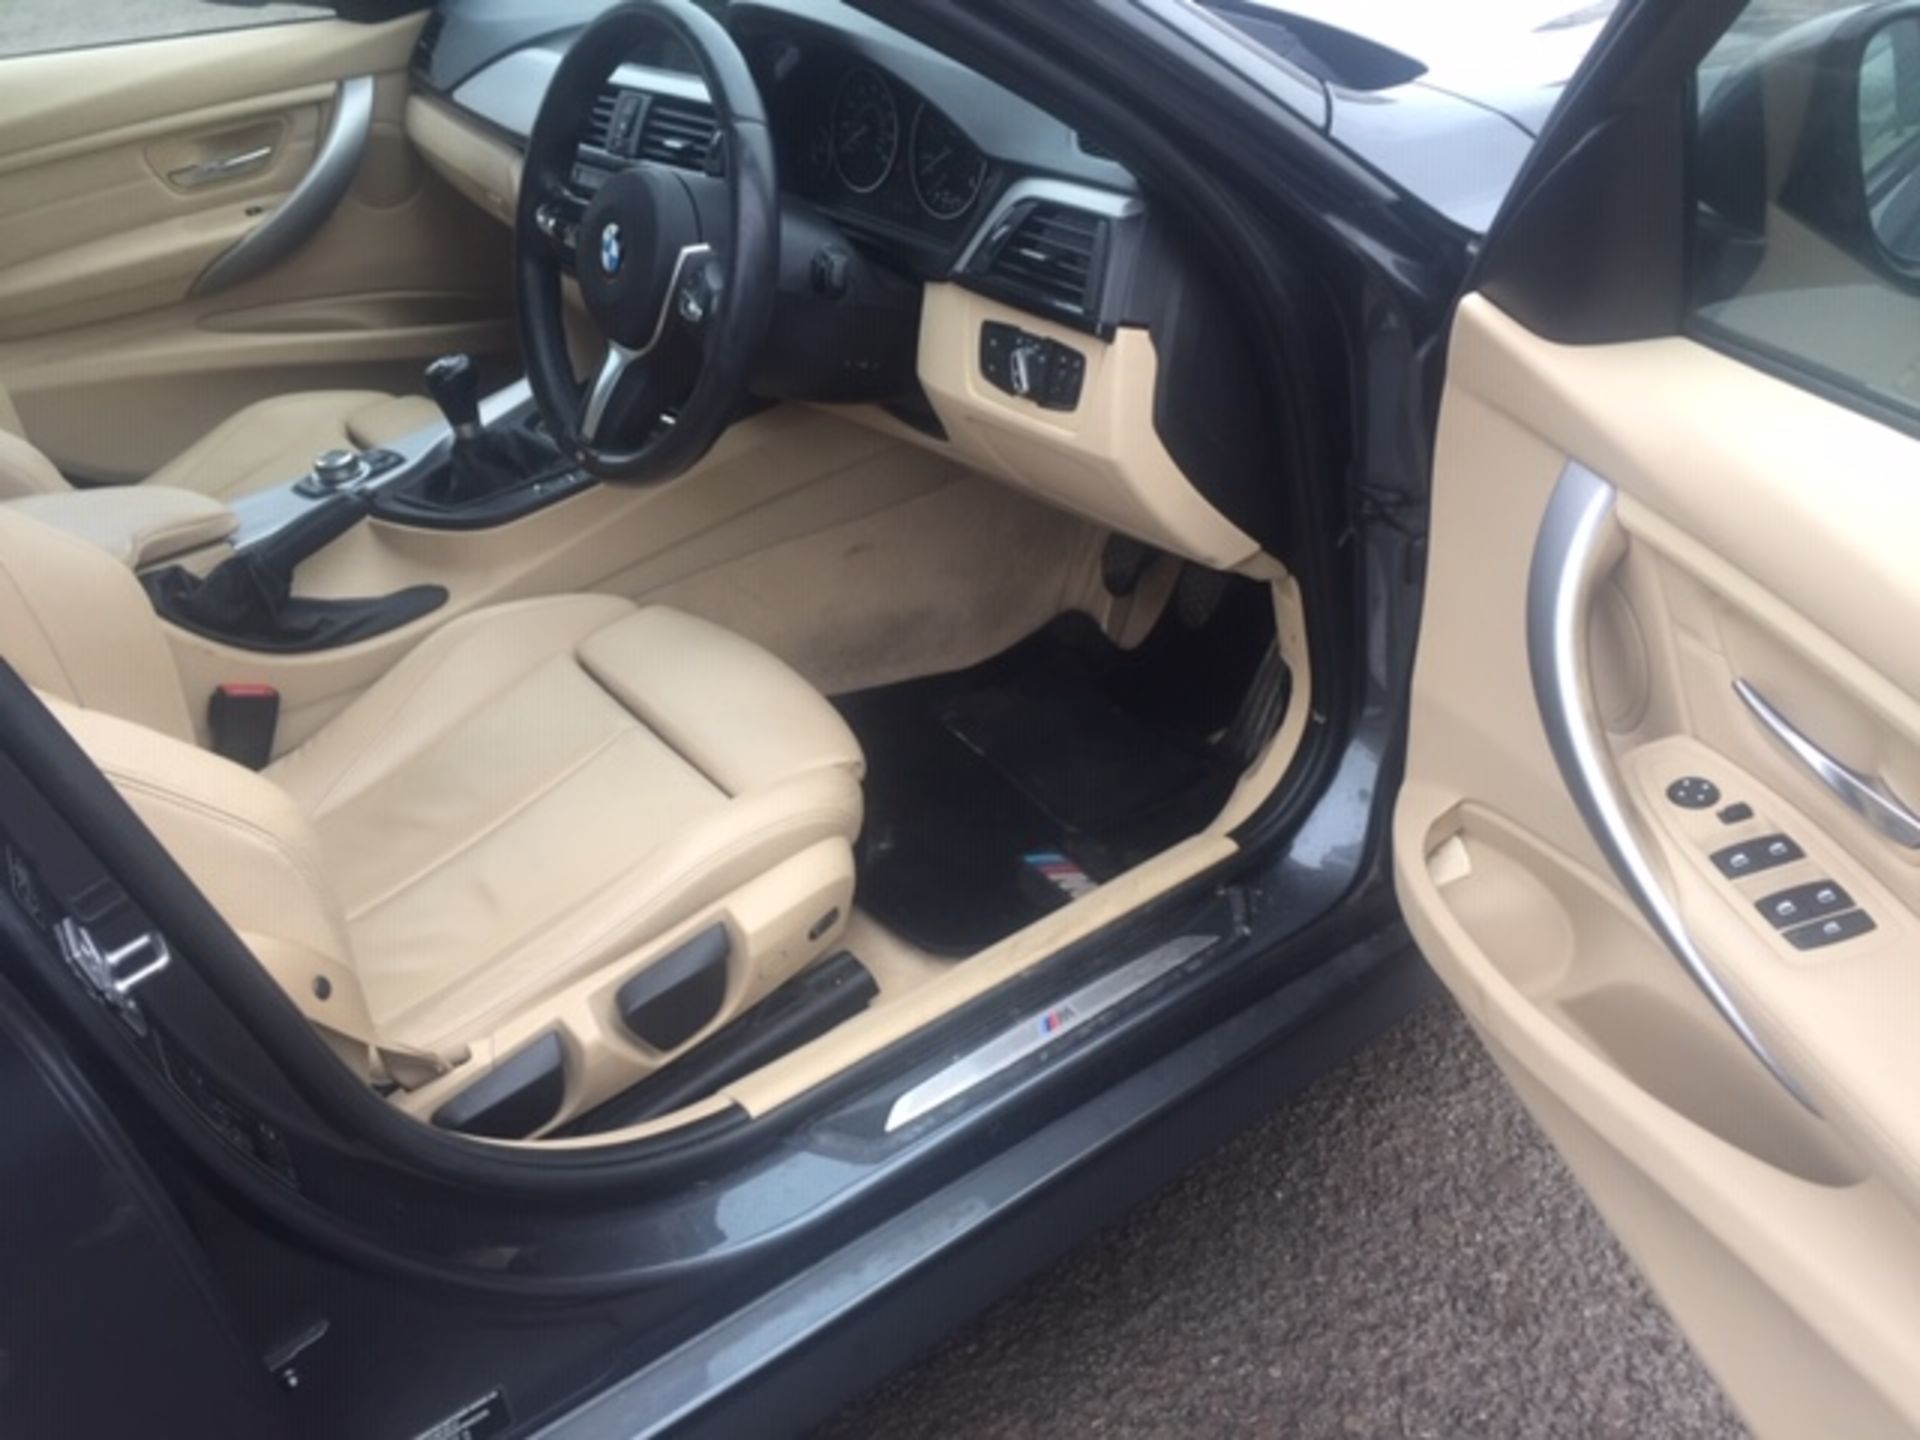 BMW 320D 2.0 M Sport 4 door saloon Registration: WK63 KHD Recorded mileage: 18,046 M.O.T: 28-09-2019 - Image 7 of 14